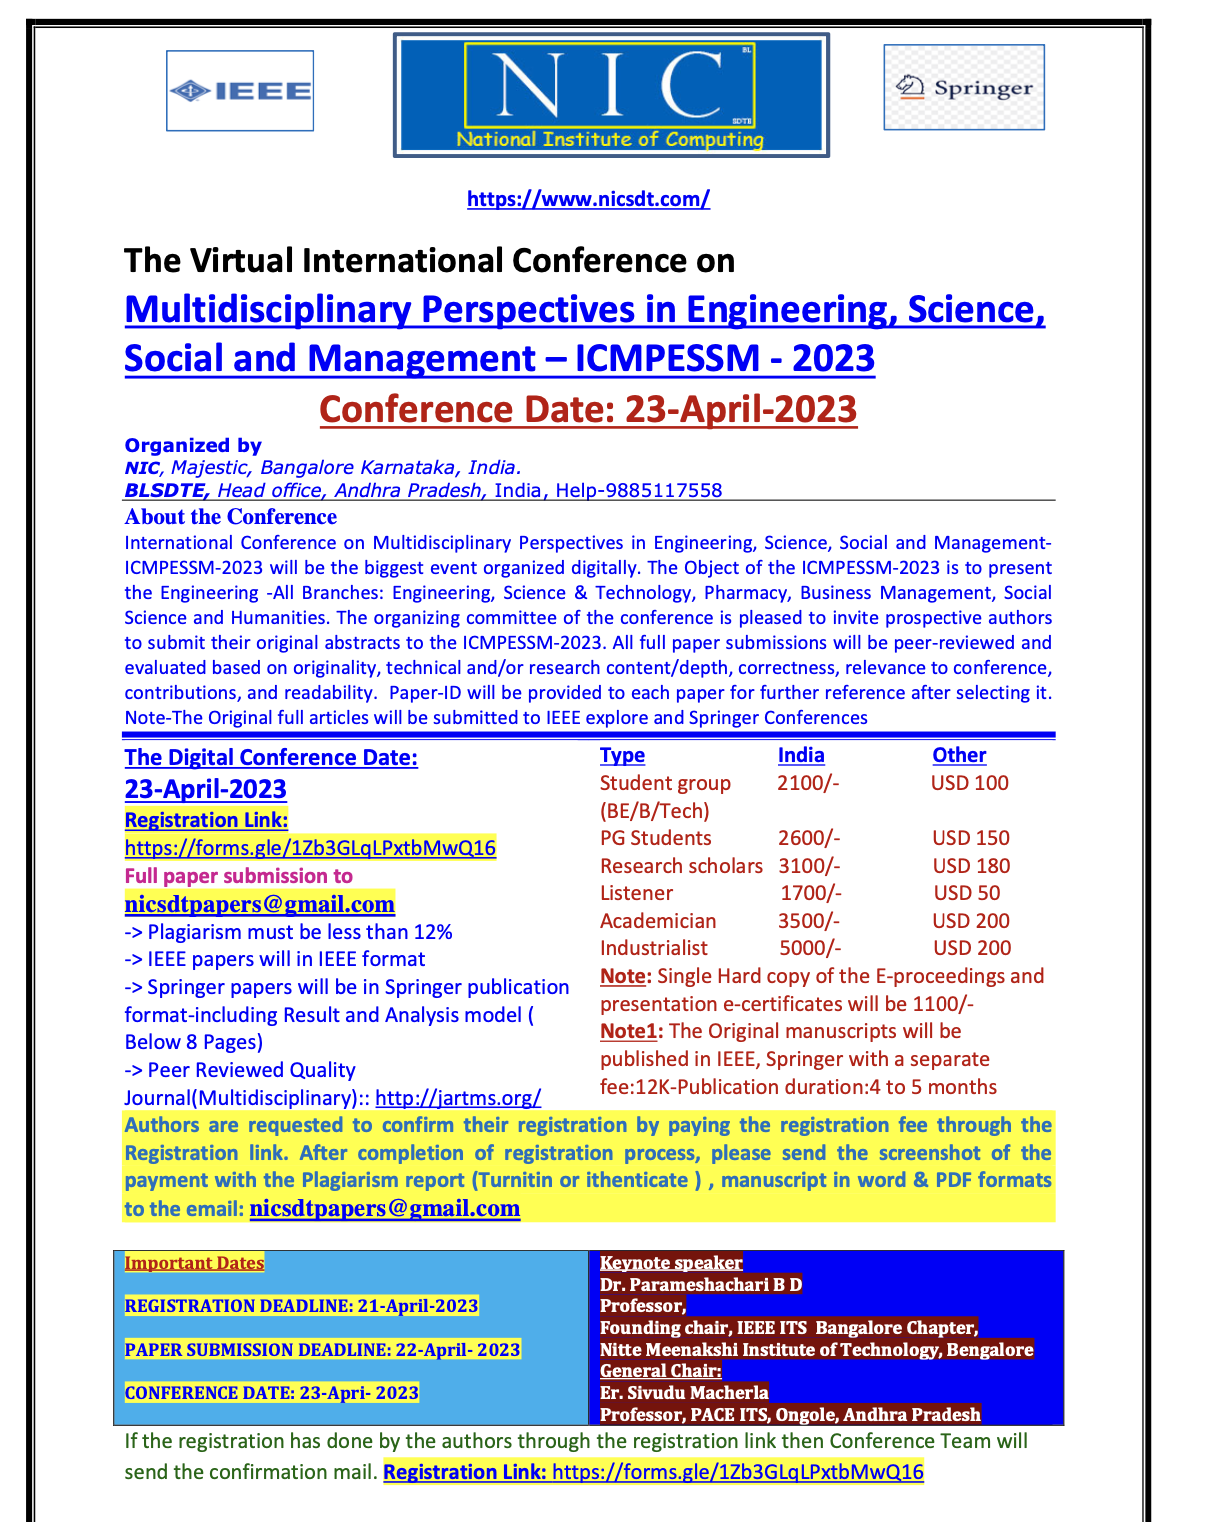 International Conference on Multidisciplinary Perspectives in Engineering, Science, Social and Management – ICMPESSM - 2023